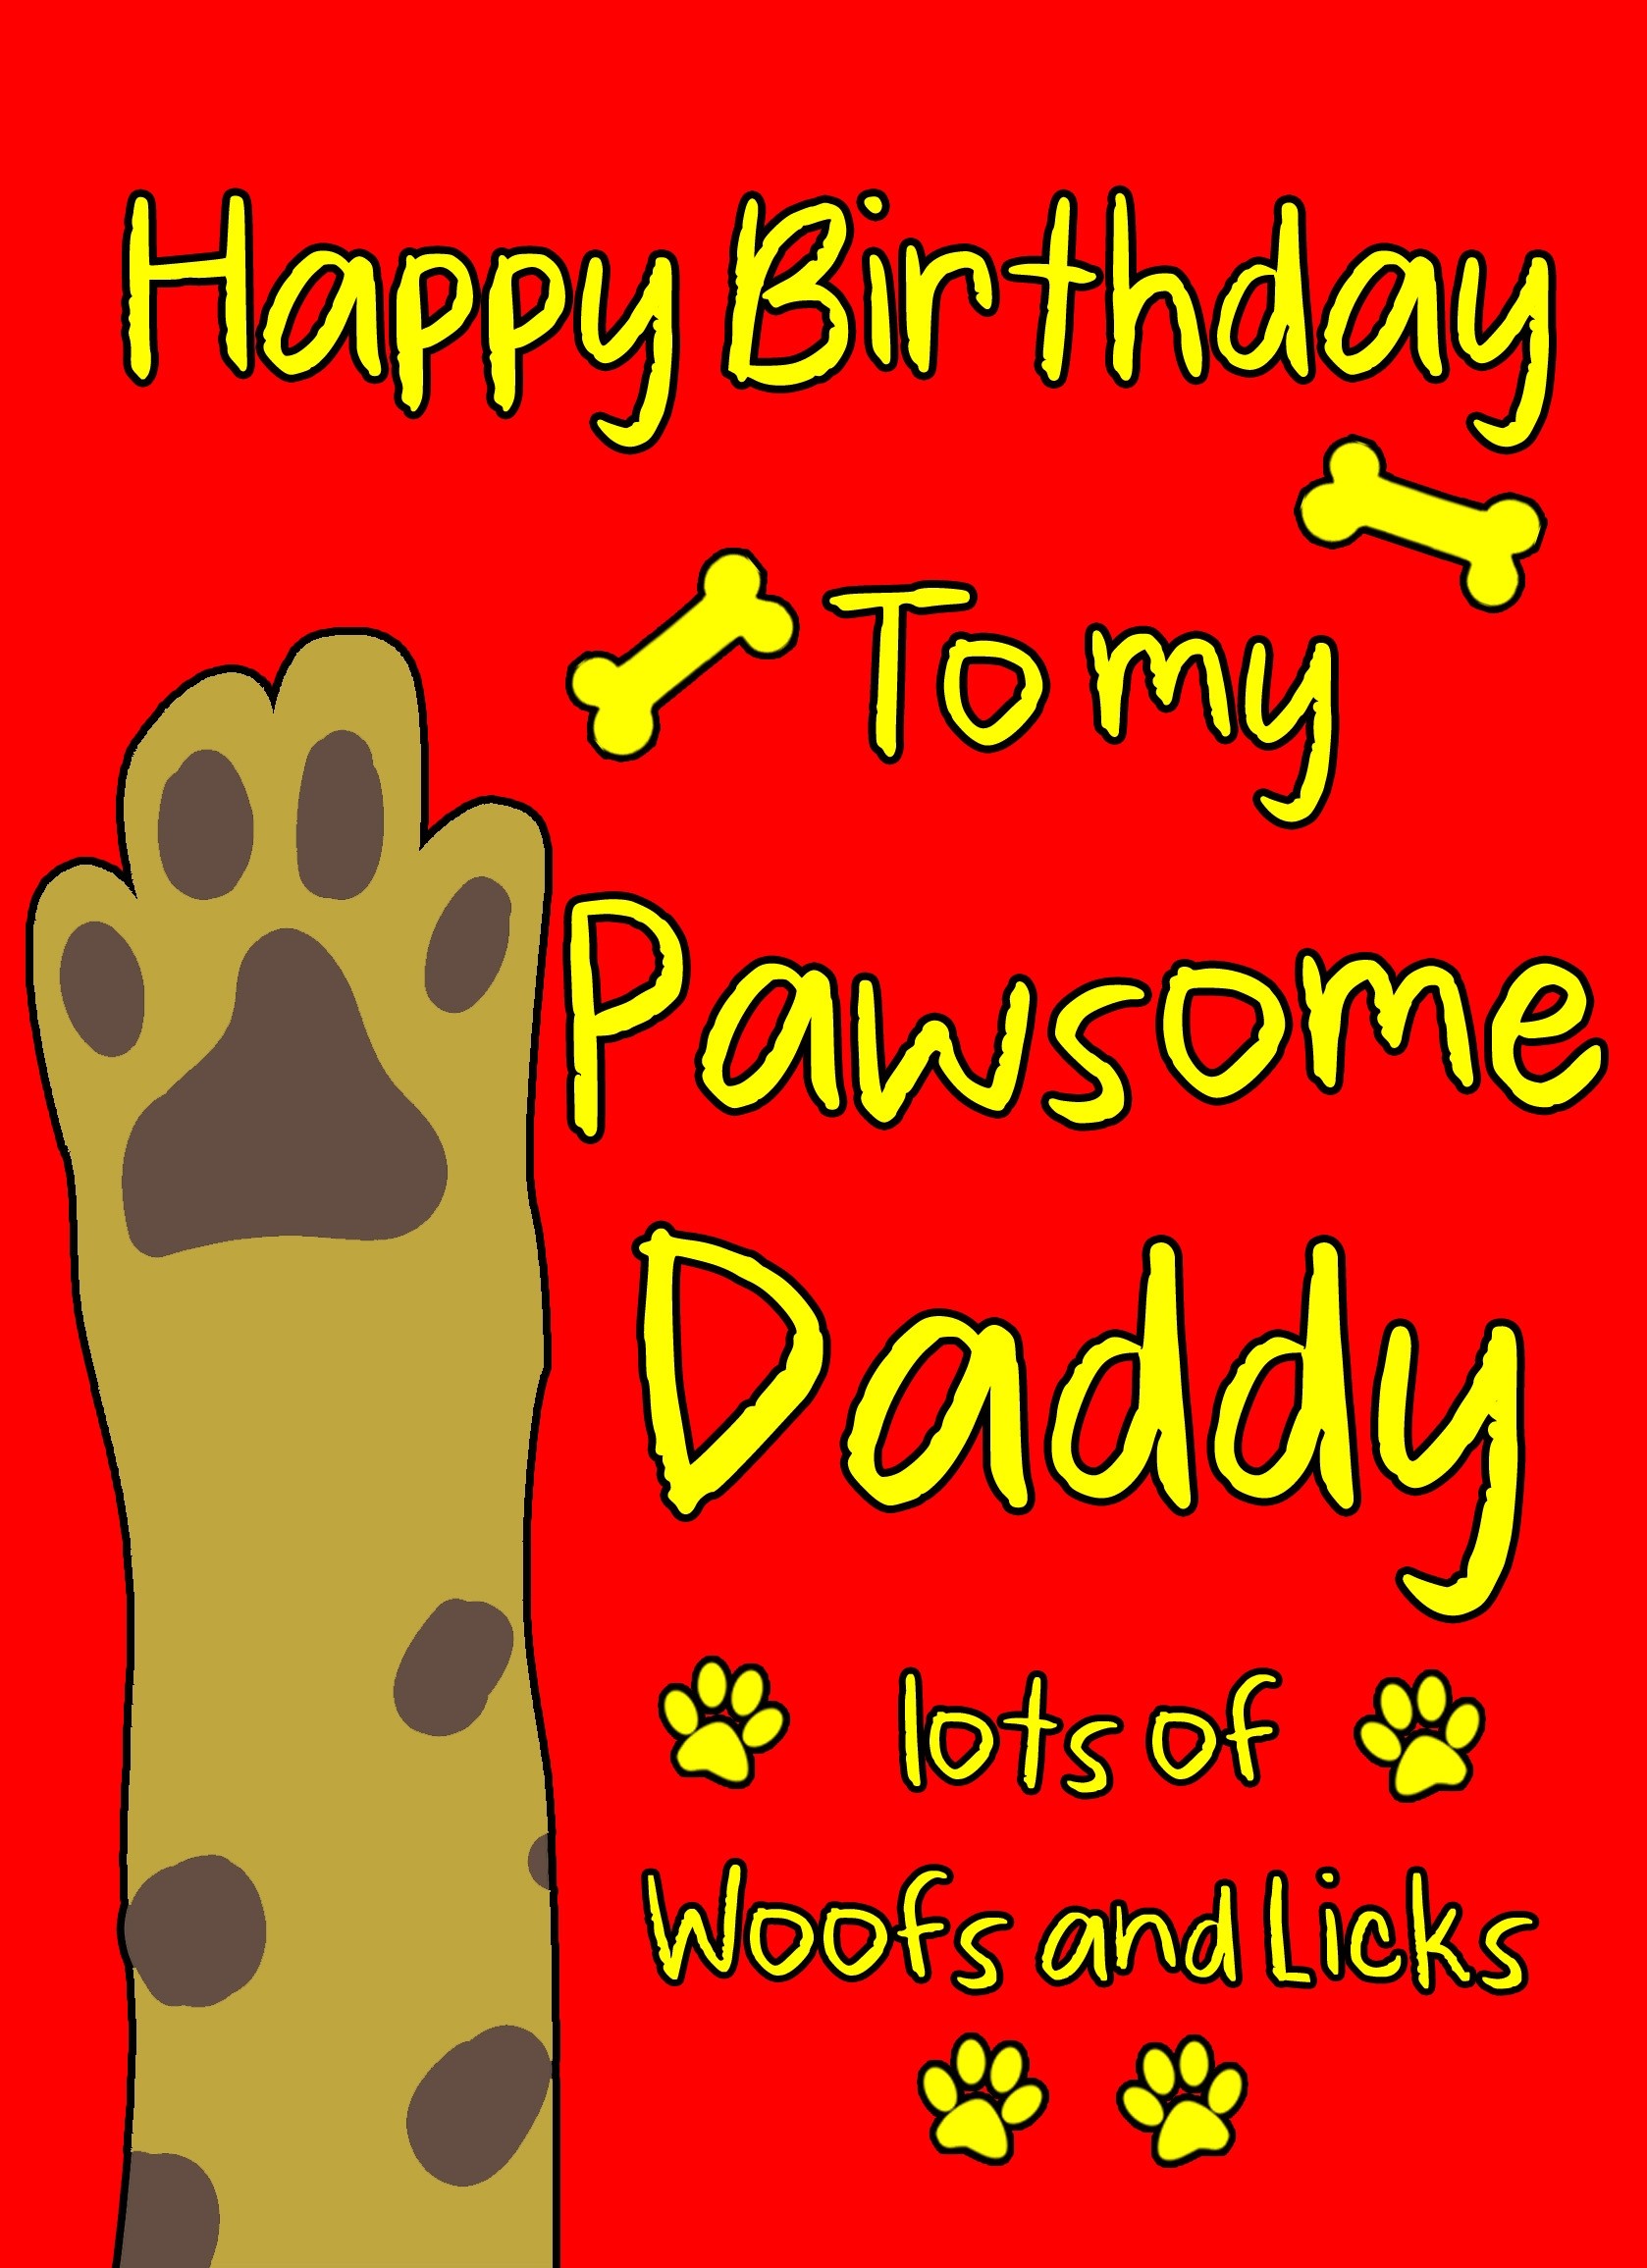 From the Dog Pawsome Birthday Card (Daddy)